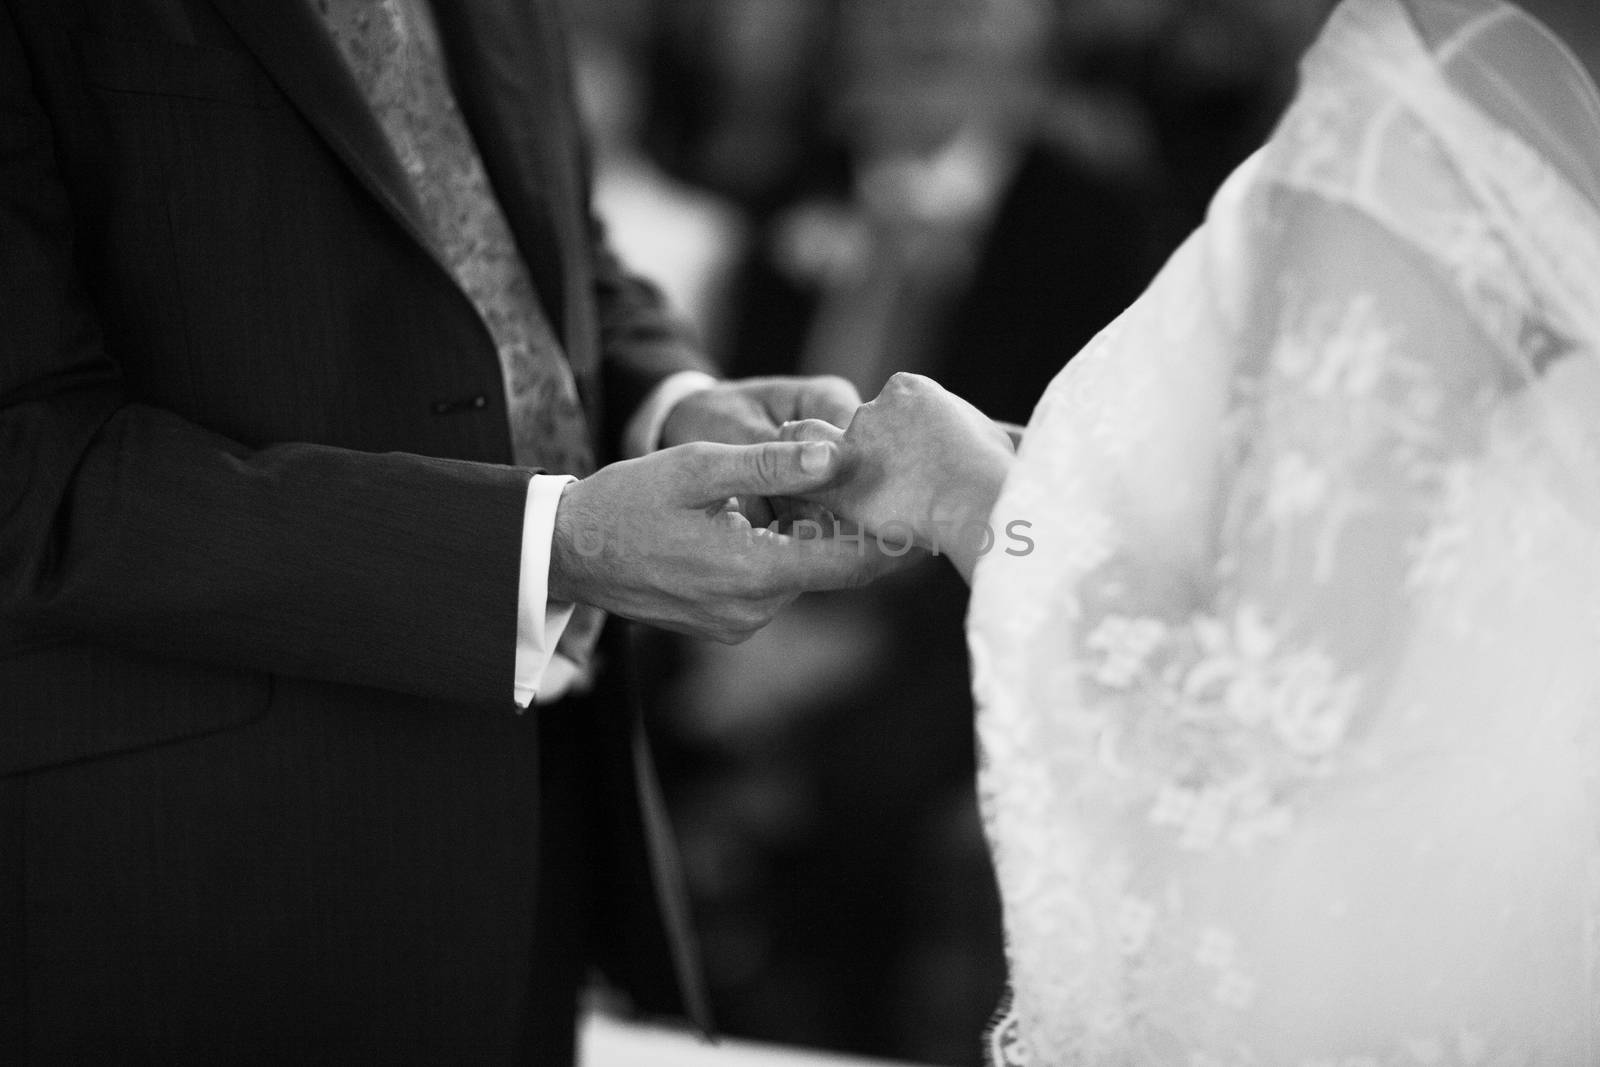 Black and white artistic digital rectangular horizontal photo of hand of bridegroom in dark long morning suit and white shirt with cufflinks in church religious wedding marriage ceremony holding hands to exchange wedding rings with the bride in white long wedding bridal dress in Barcelona Spain. Shallow depth of with background out of focus. 